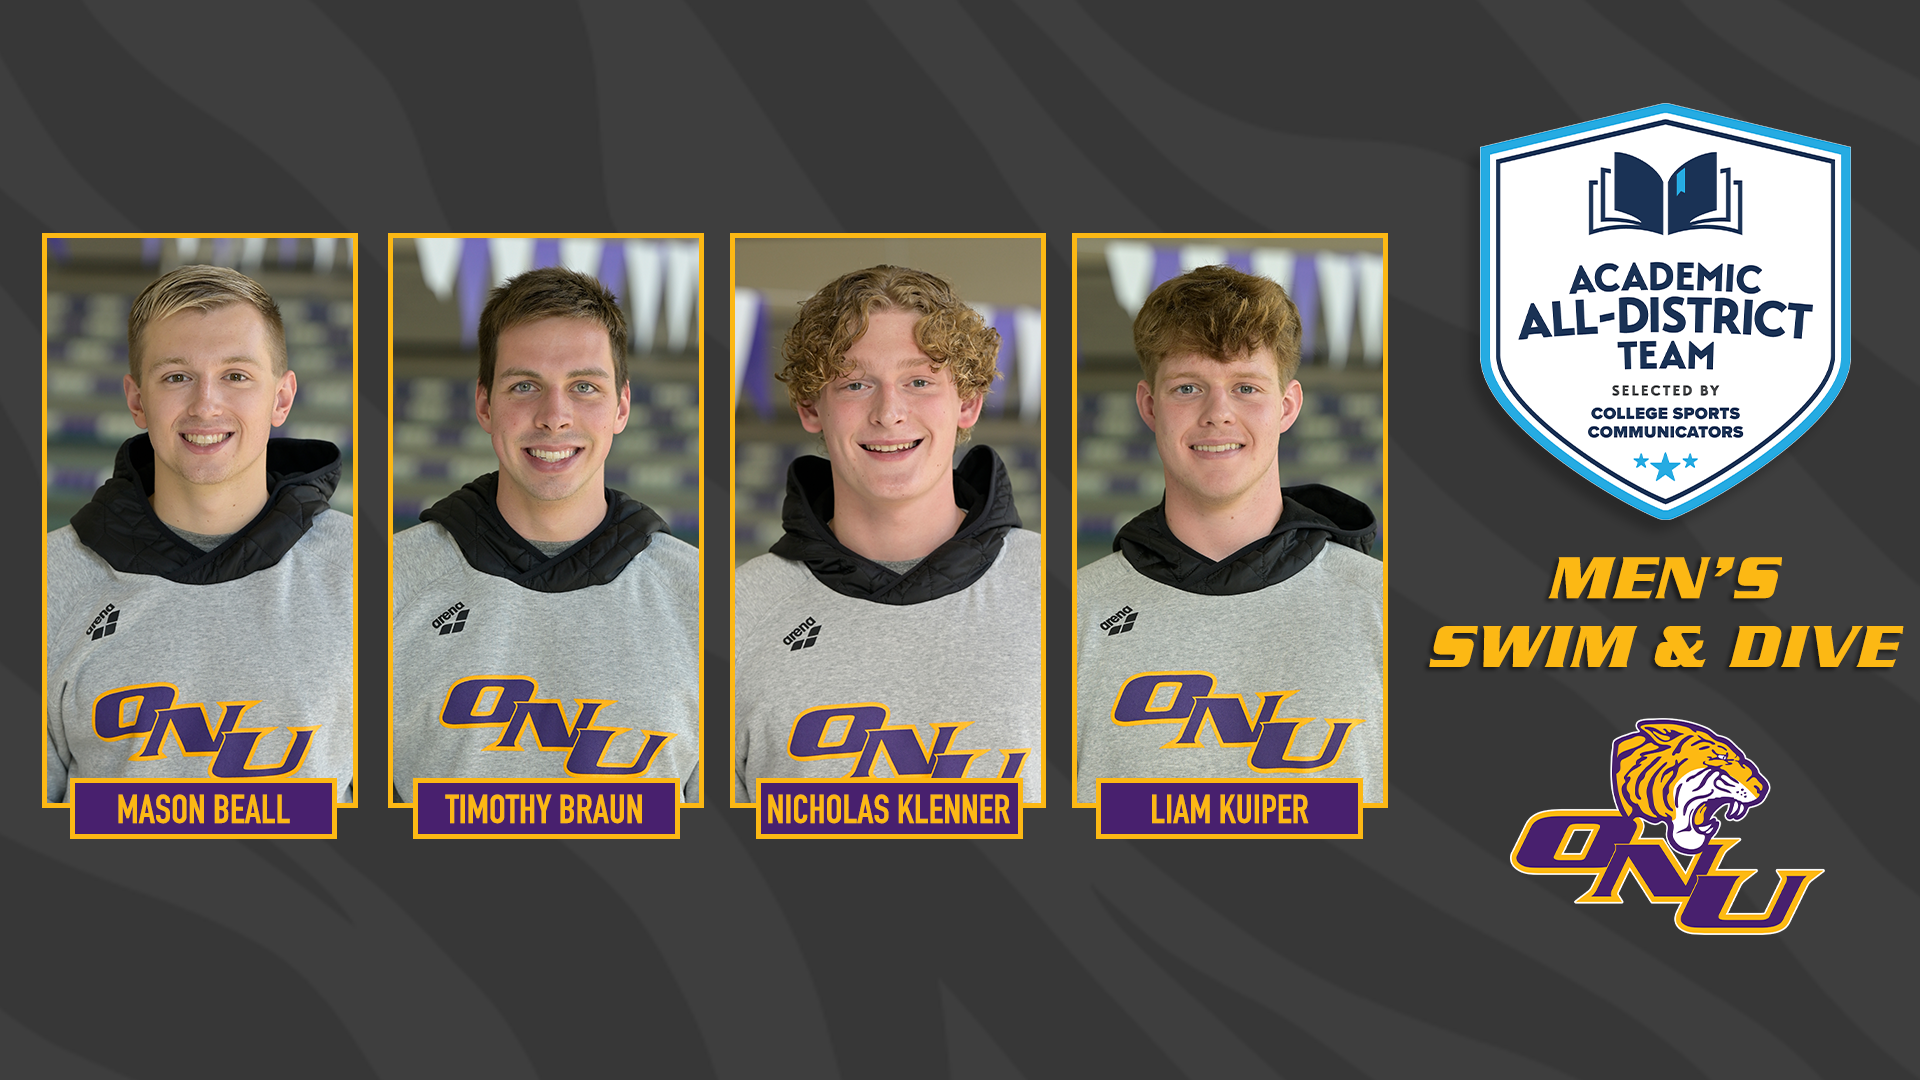 FOUR NAMED TO CSC ACADEMIC ALL-DISTRICT MEN’S SWIM TEAM